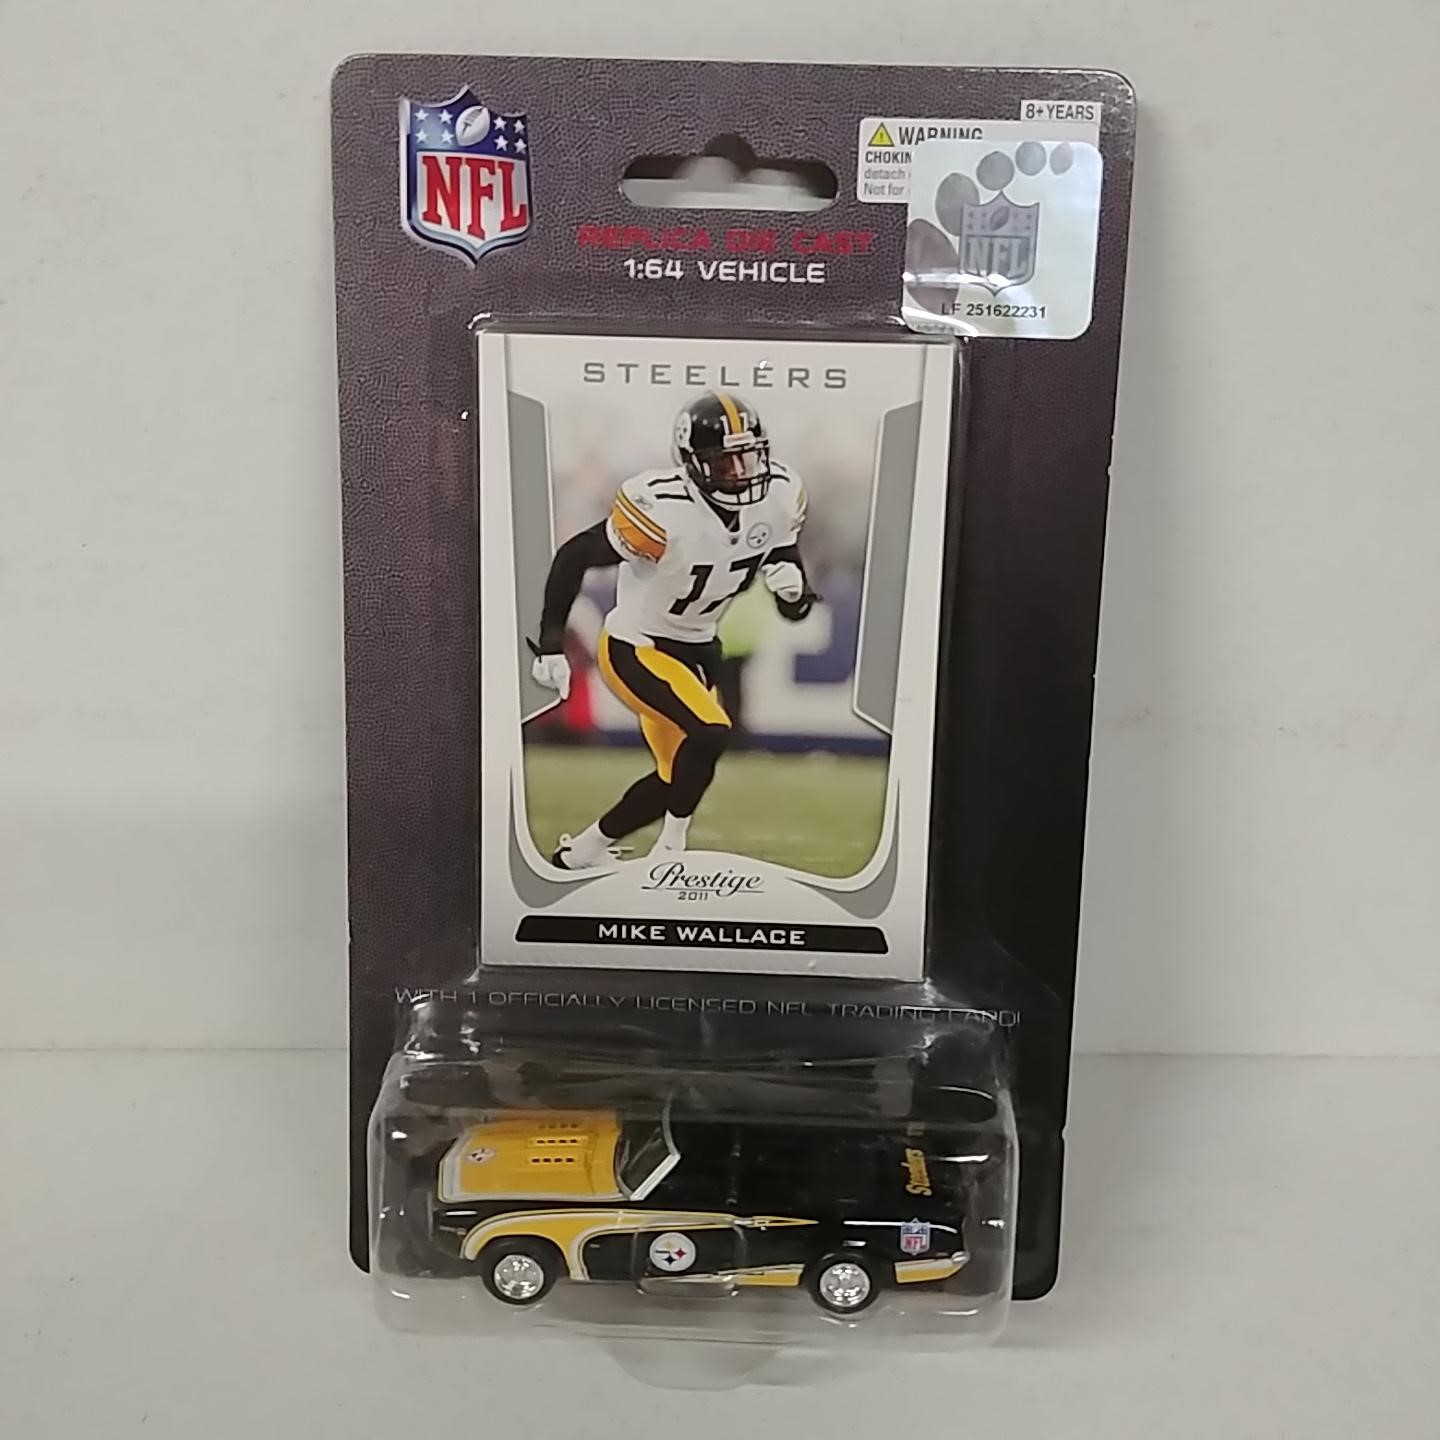 2011 Pittsburgh Steelers 1/64th Mustang with Mike Wallace trading card